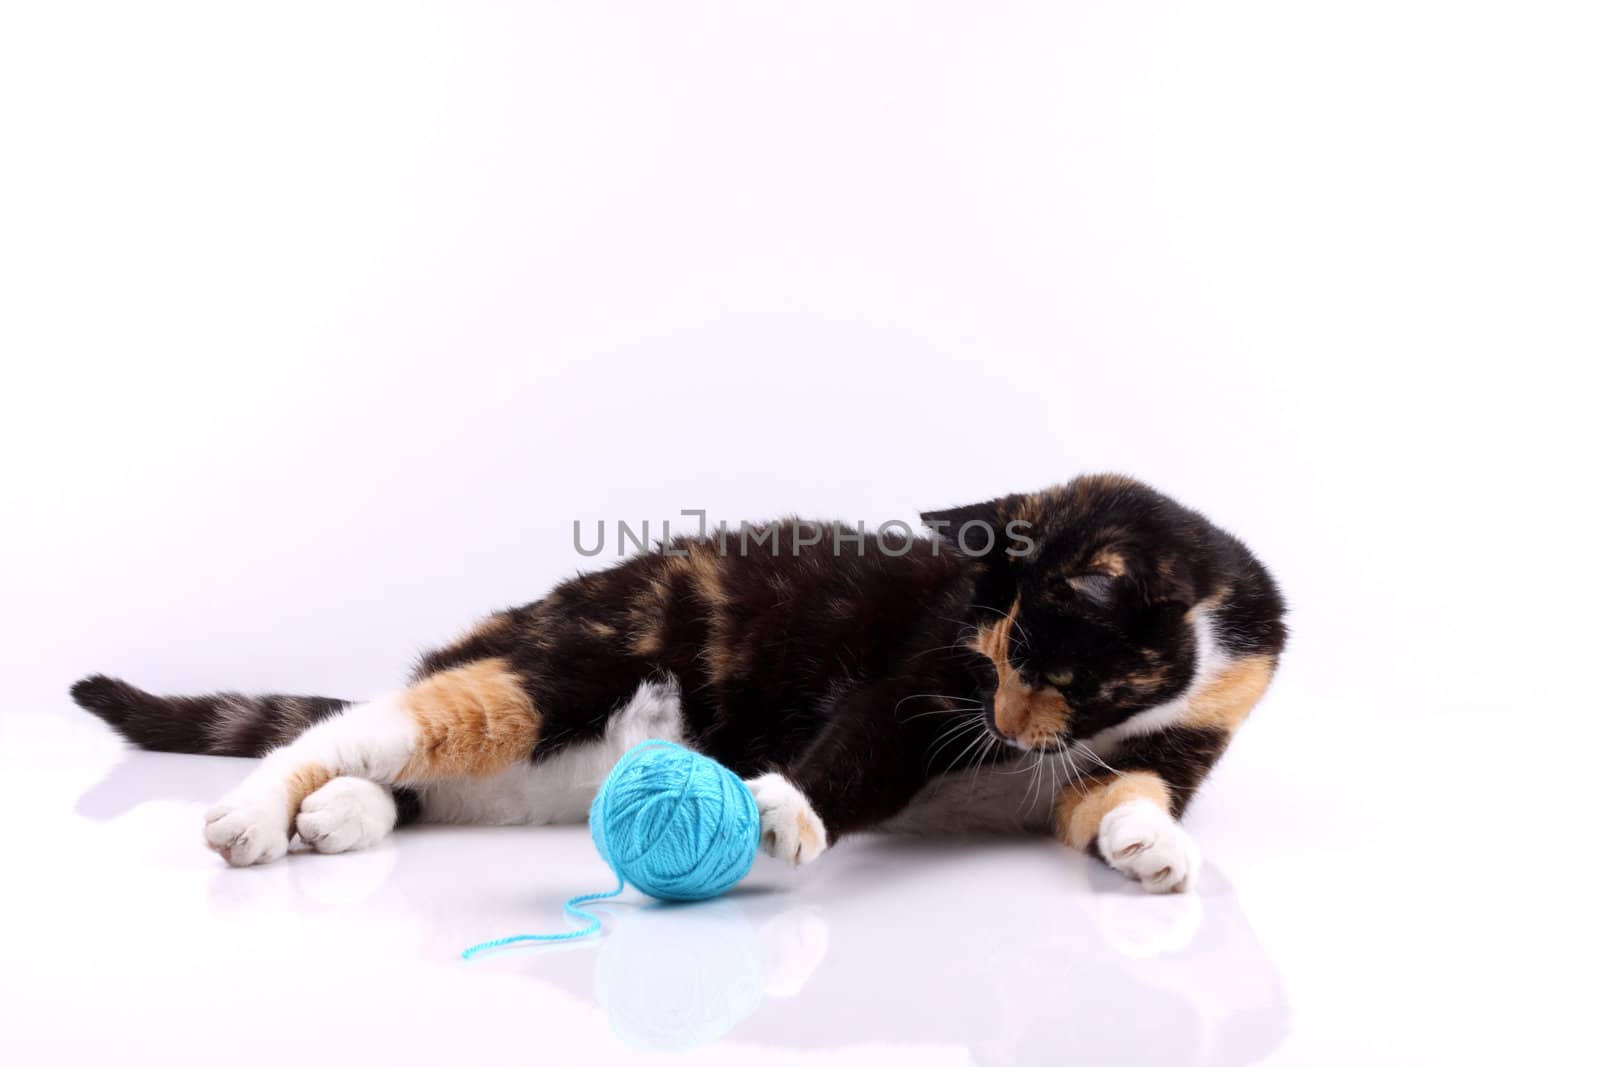 cat playing with a blue wool